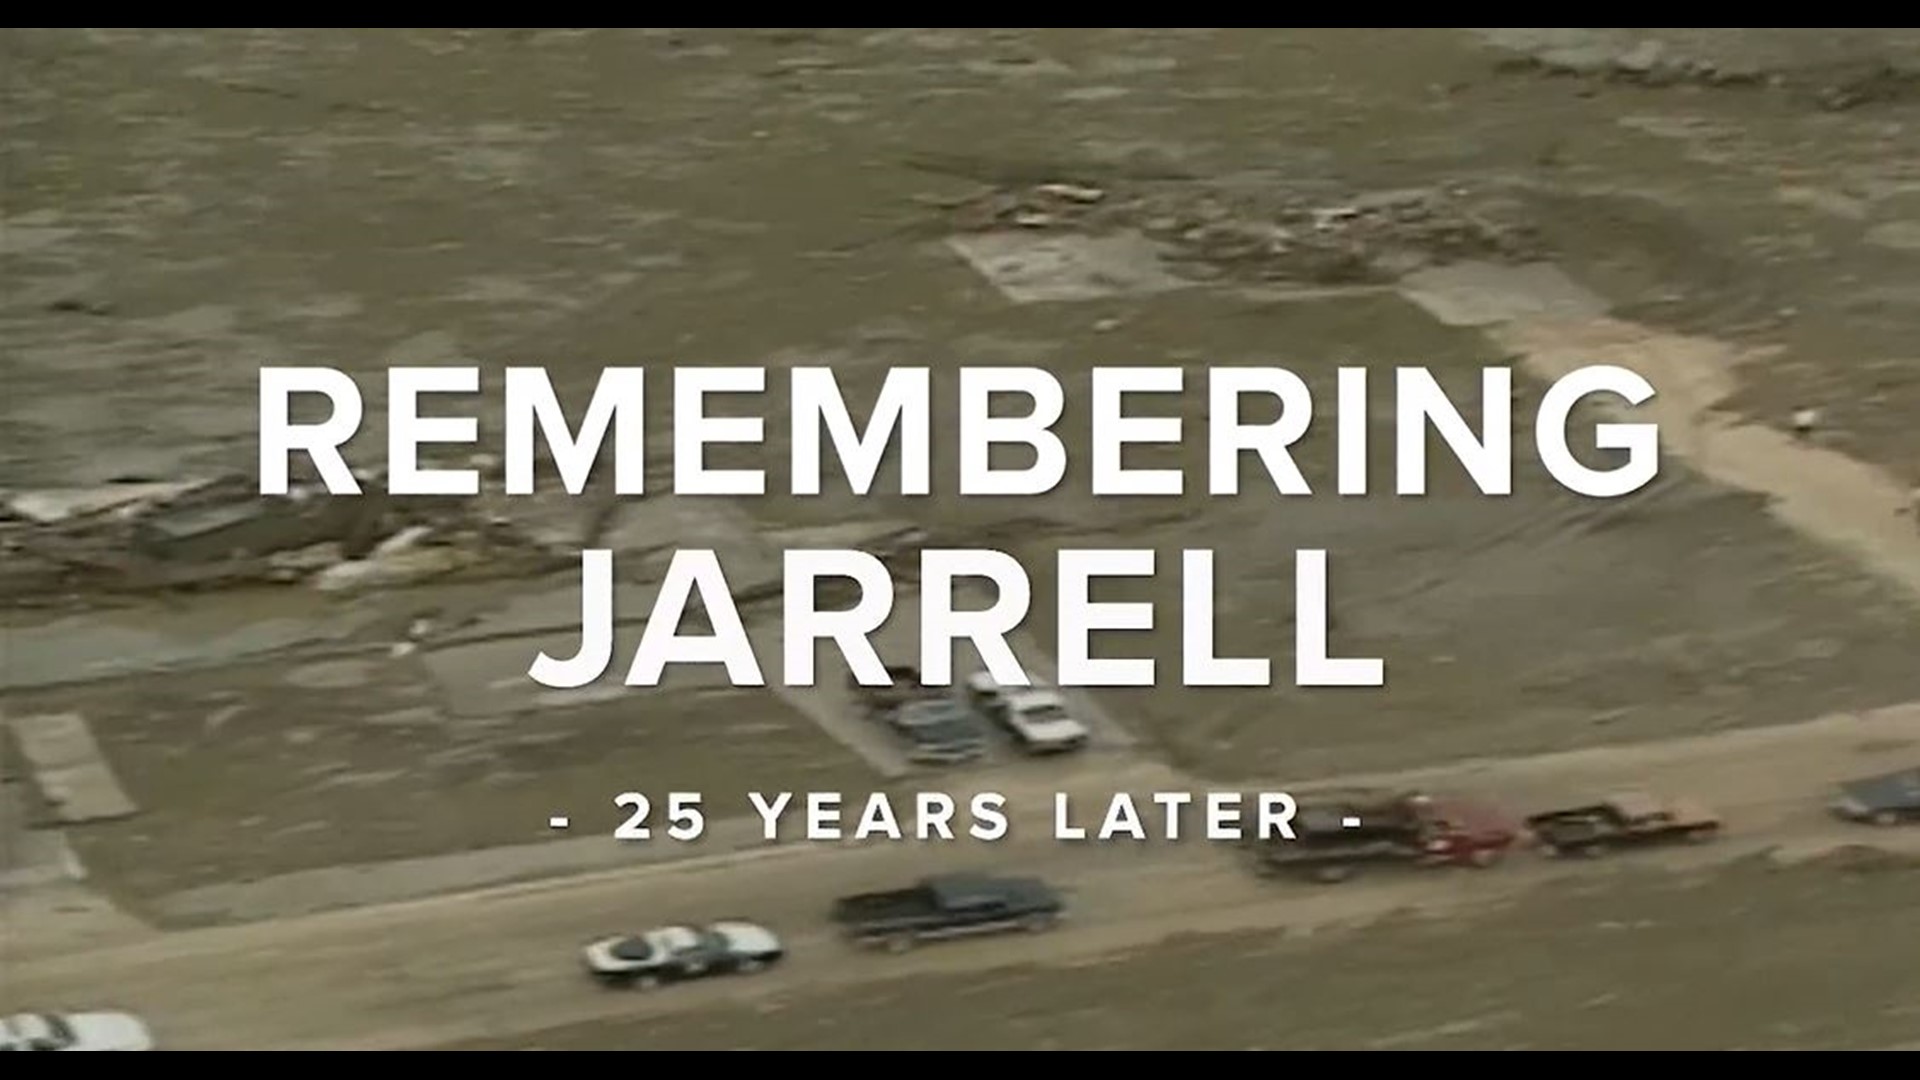 On May 27, 1997, 27 people were killed when an F-5 tornado tore through the town of Jarrell, Texas. KVUE looks back and remembers the lives lost